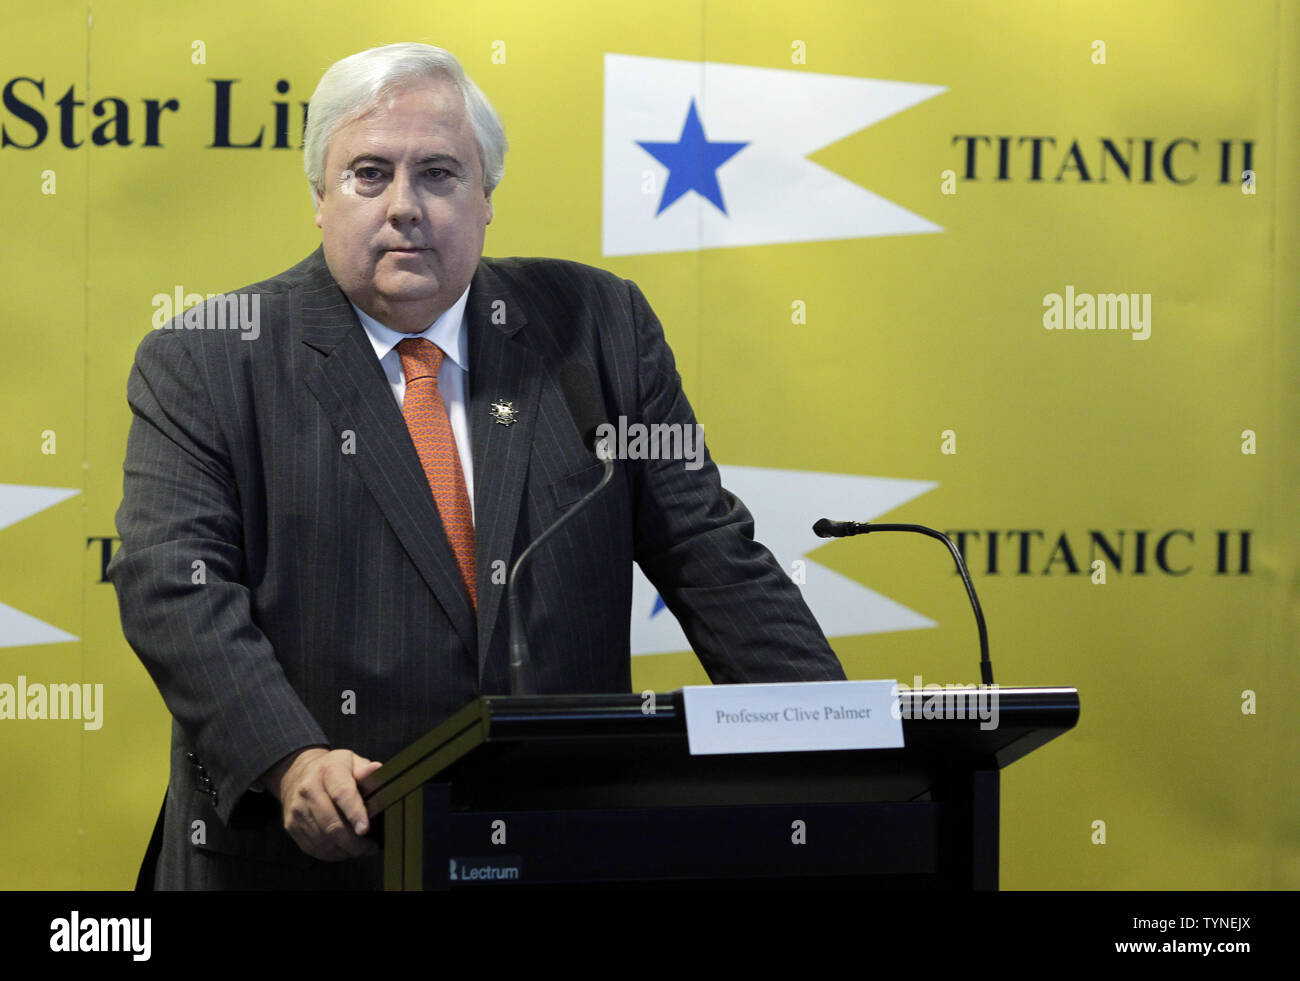 Australian billionaire and chairman of the shipping company Blue Star Line, Clive Palmer, discusses plans for the company's planned Titanic II cruise ship at the Intrepid Sea, Air & Space Museum in New York City on February 26 2013. The ship was designed by marine engineering company Deltamarin Ltd. of Raisio, Finland, and is scheduled to be completed by 2016 by the CSC Jinling Shipyard Co. in China.    UPI/John Angelillo Stock Photo